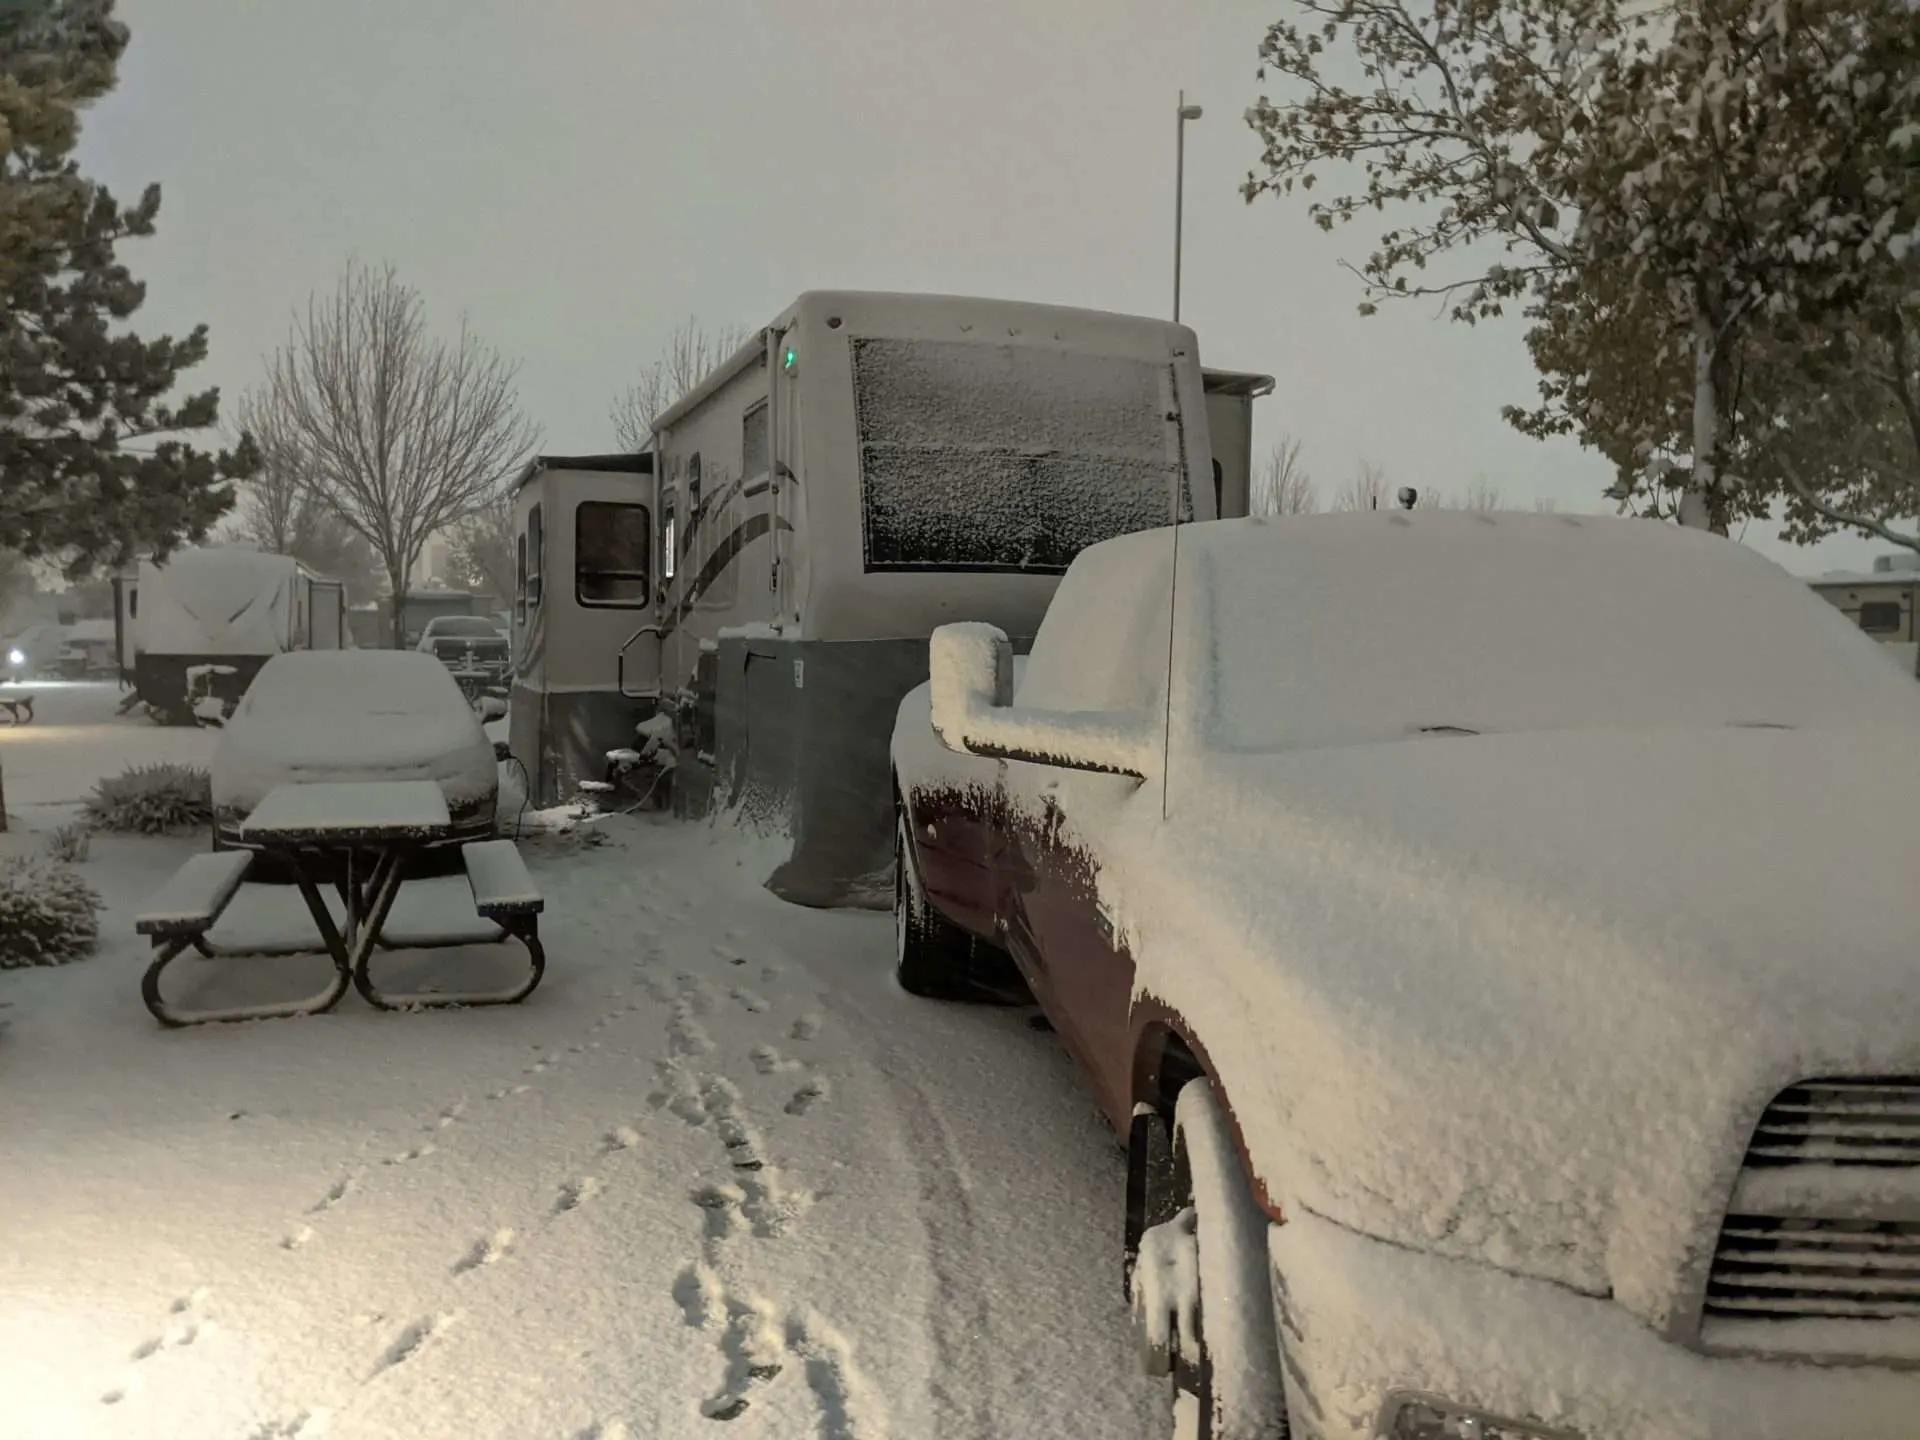 Mortons on the Move truck and RV covered in snow.